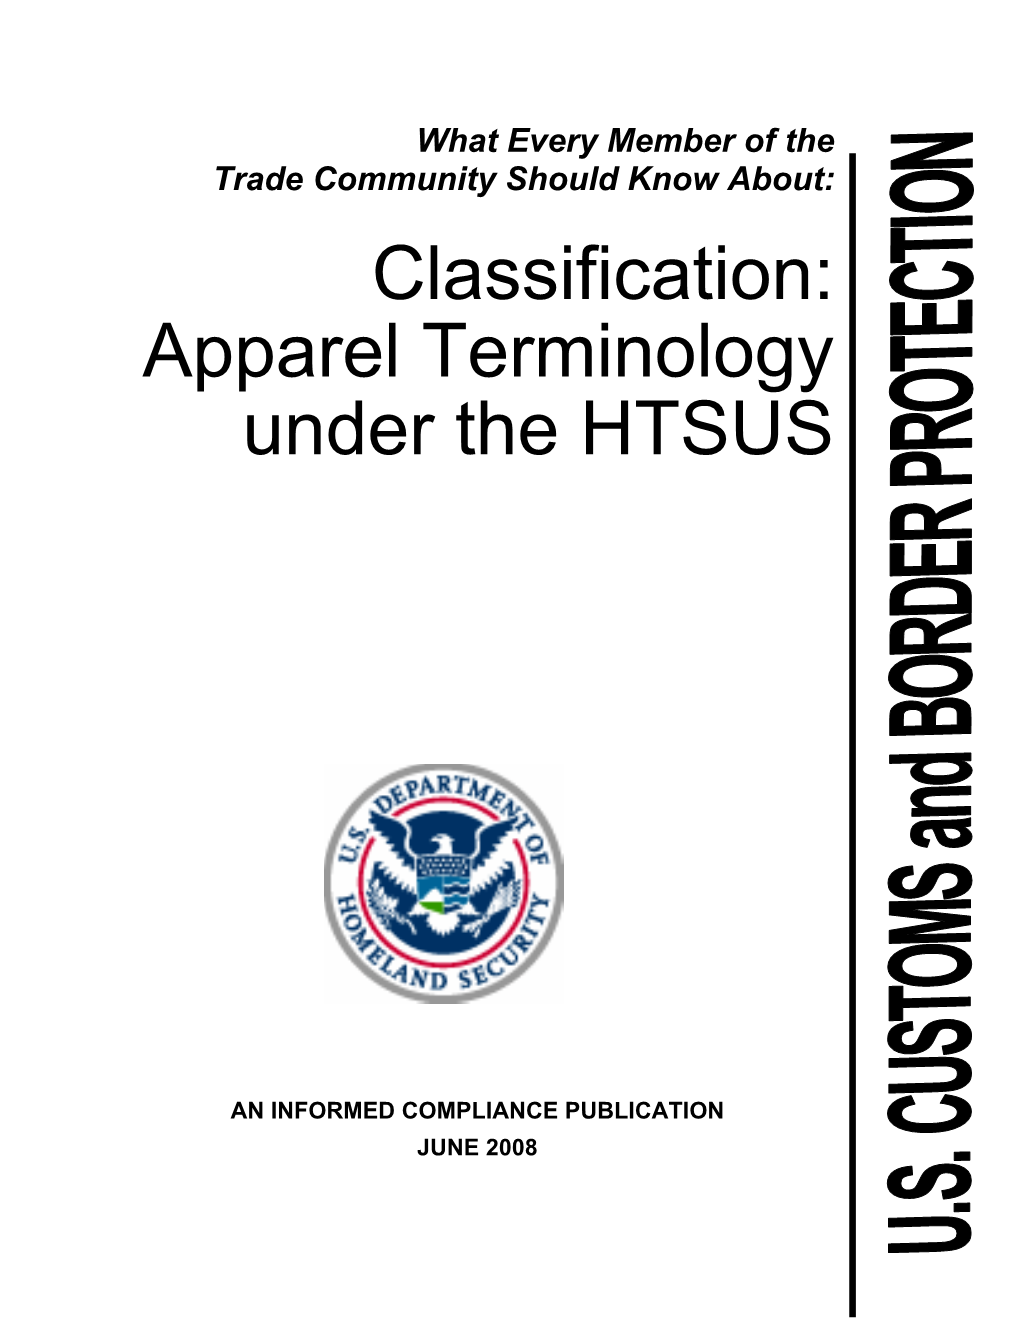 Classification: Apparel Terminology Under the HTSUS